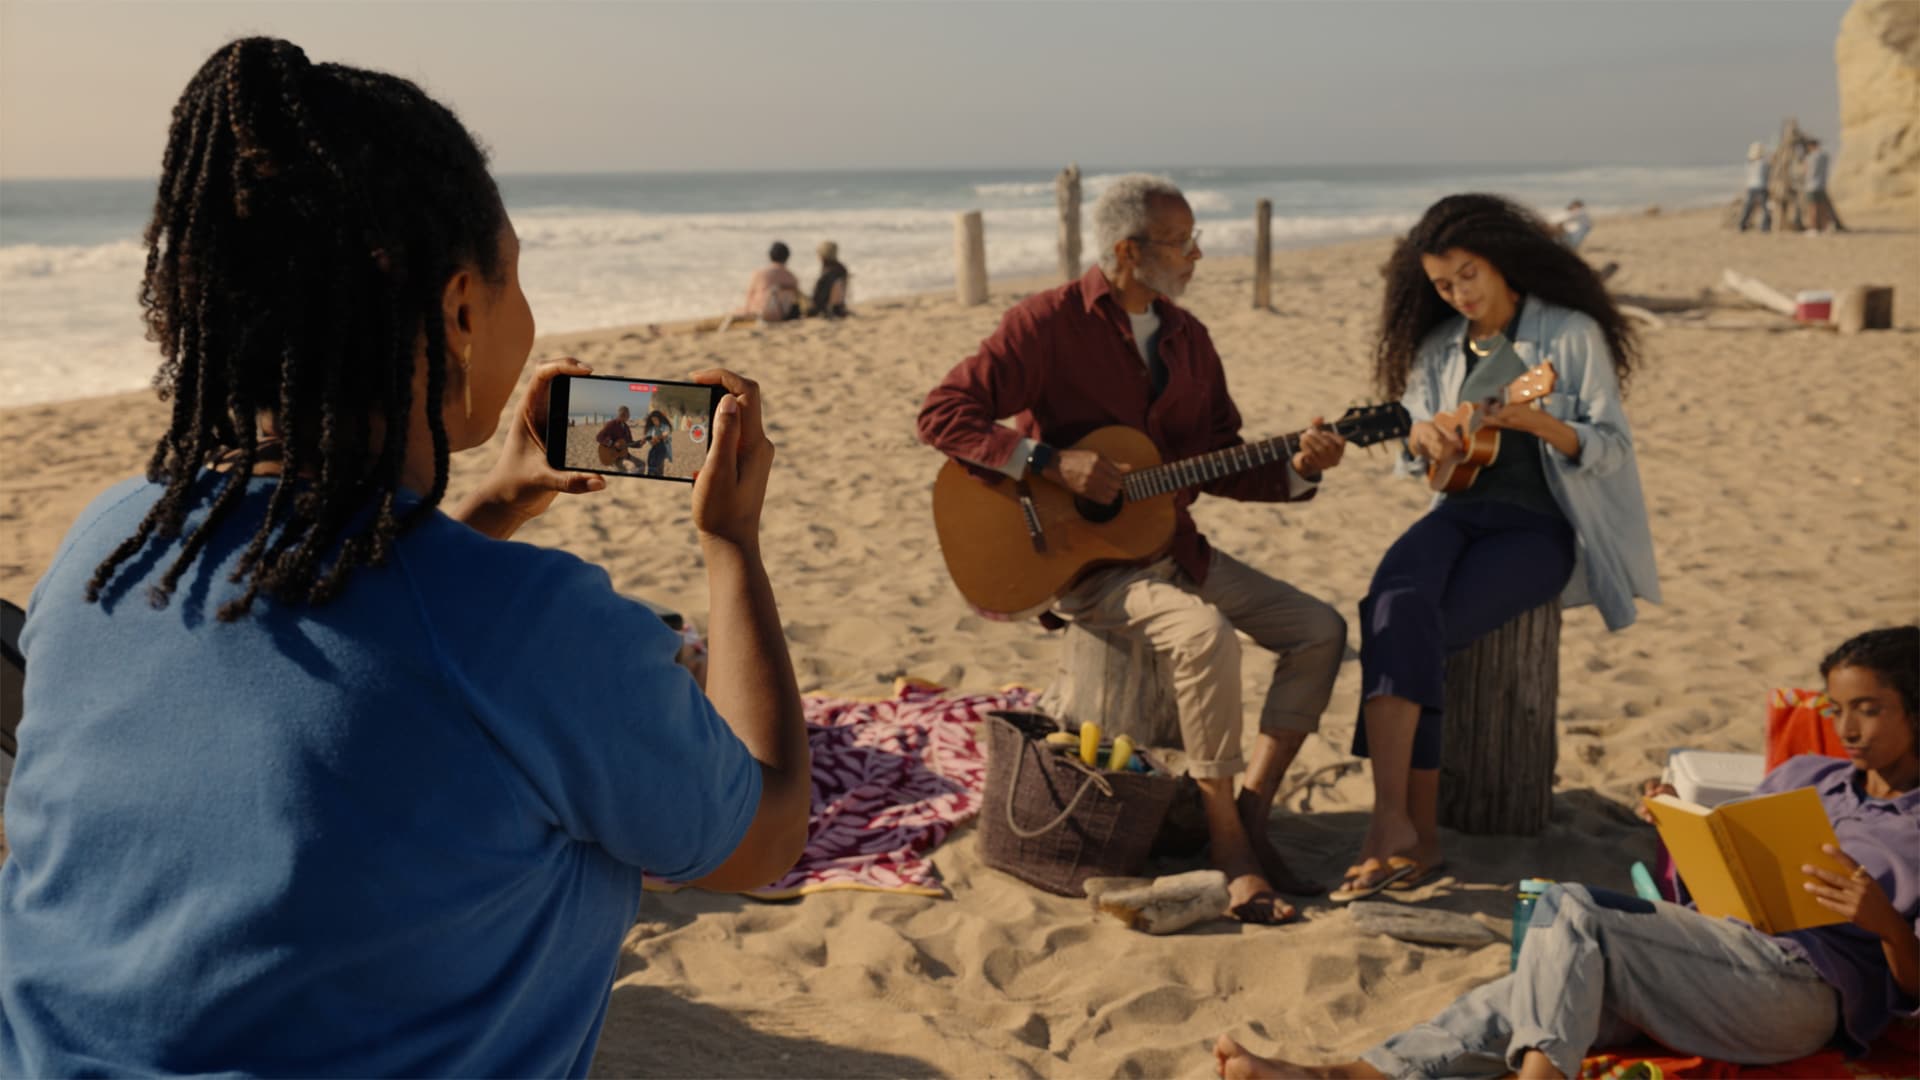 Woman on the beach using her iPhone to capture a spatial video of an older man and woman playing guitars